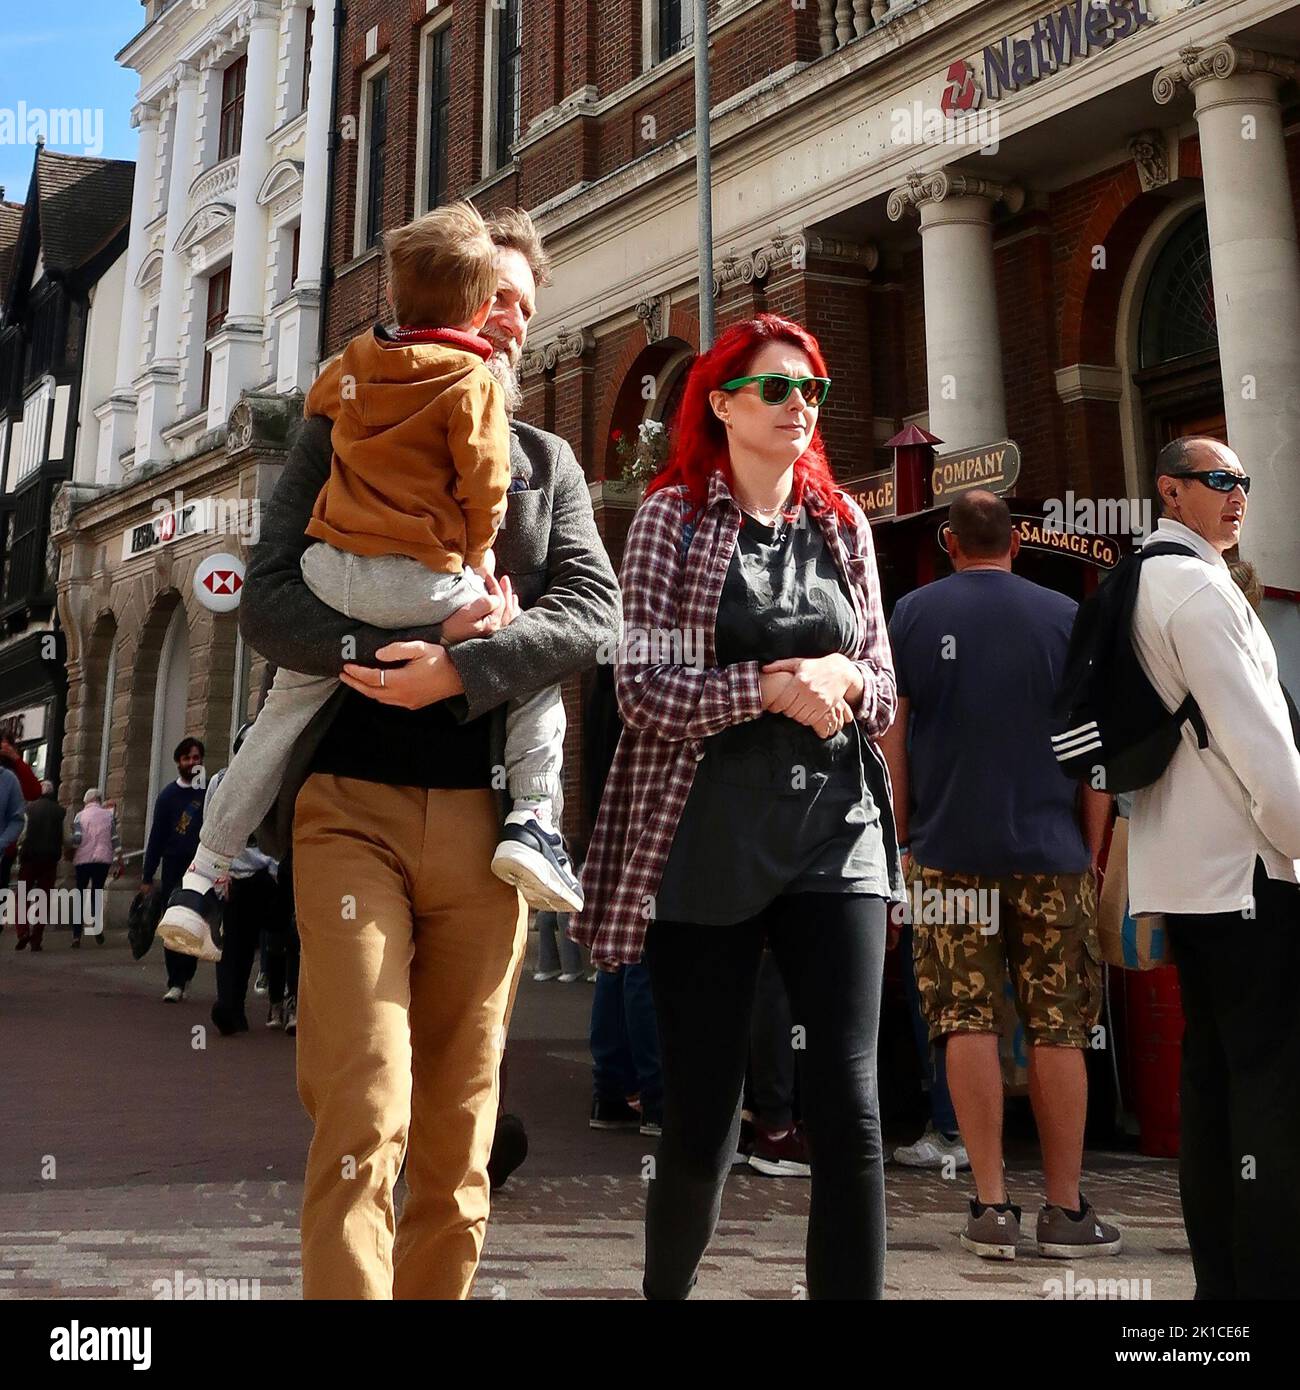 Ipswich, Suffolk, UK - 17 September 2022 : A family of three walk through the town centre. The man is carrying a child. The woman has bright red hair and green framed sunglasses. Stock Photo